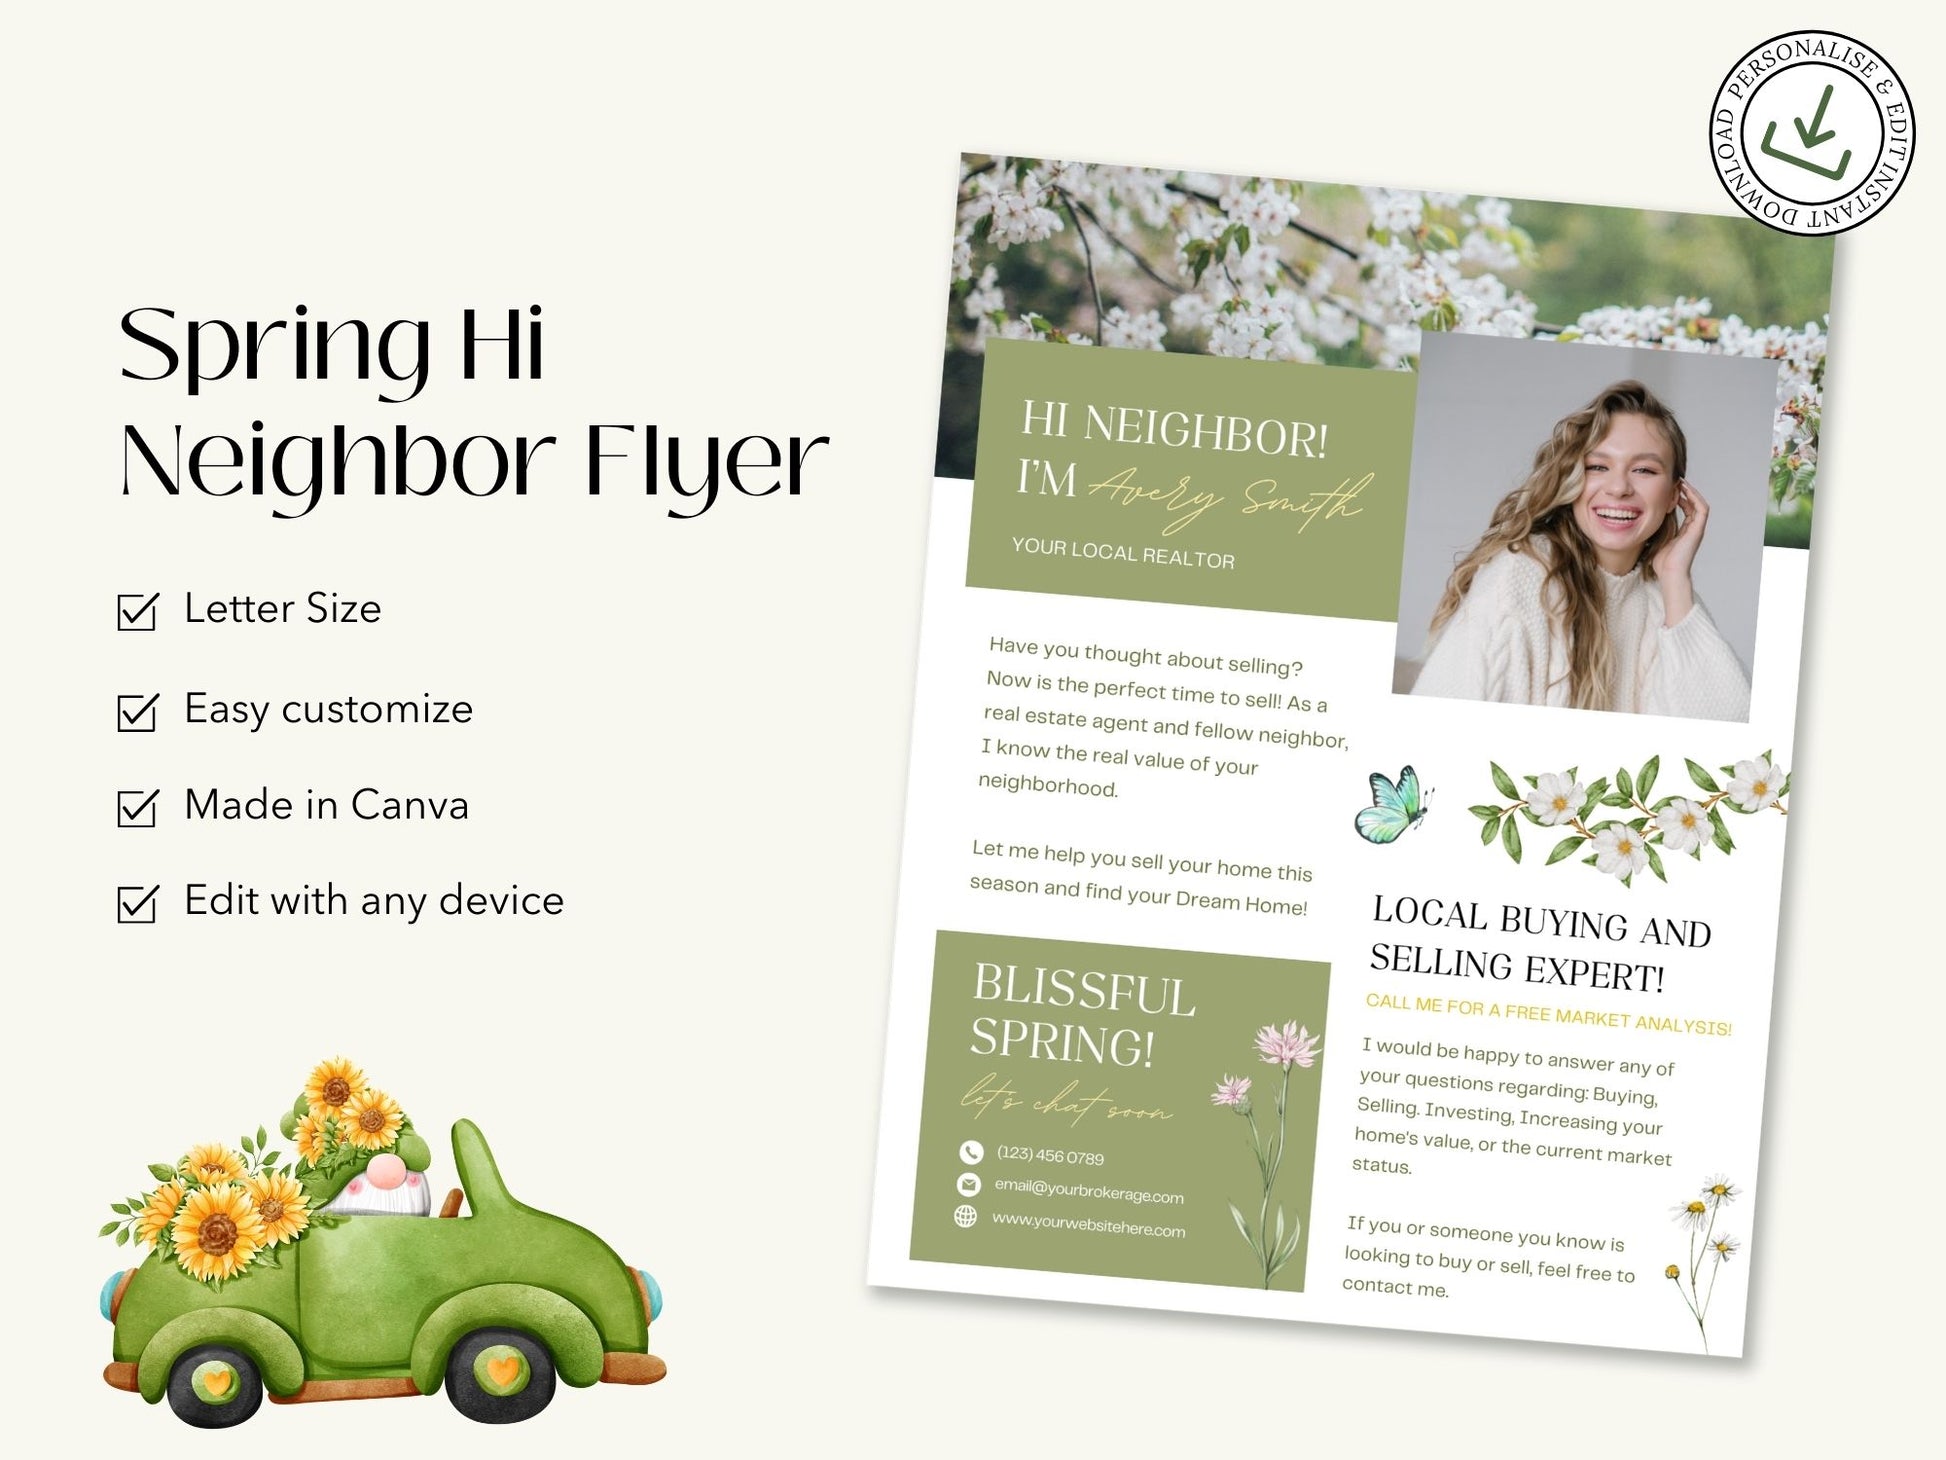 Spring Hello Neighbor Flyer - Professionally designed real estate flyer welcoming the season and showcasing property listings.